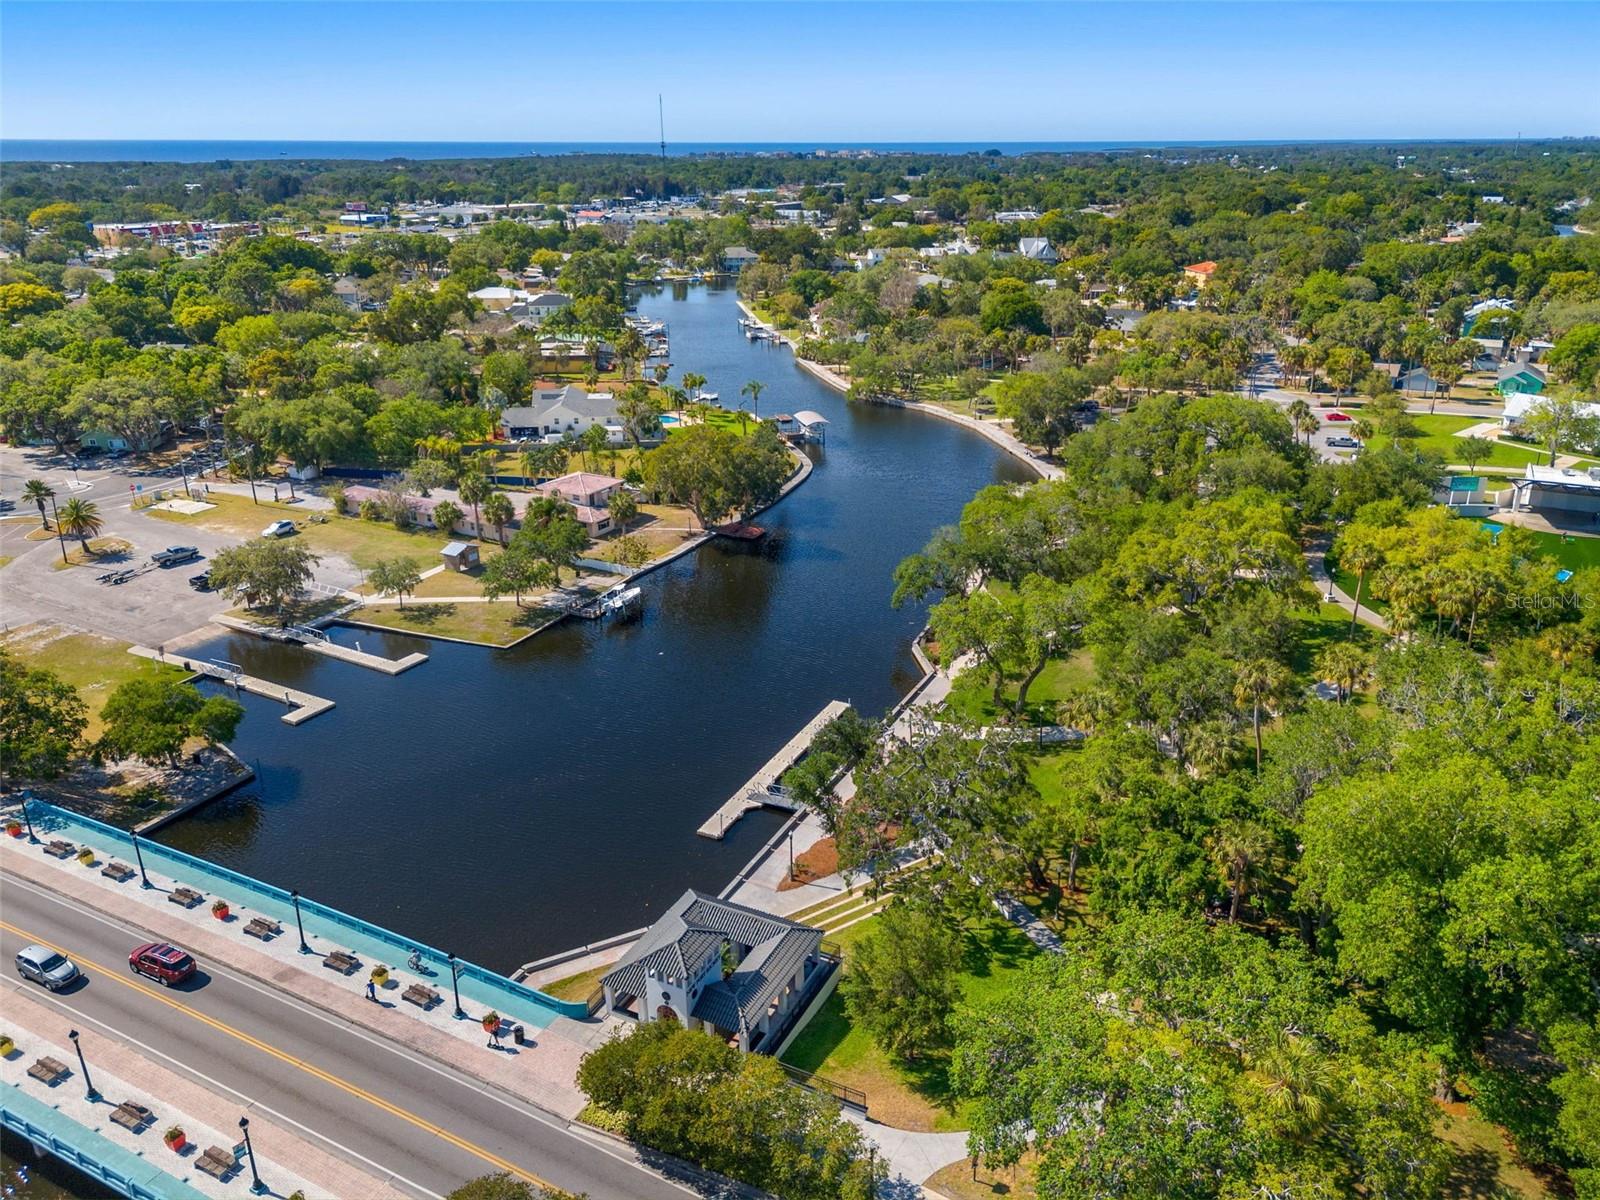 Cotee River/ boat ramp-Downtown New Port Richey